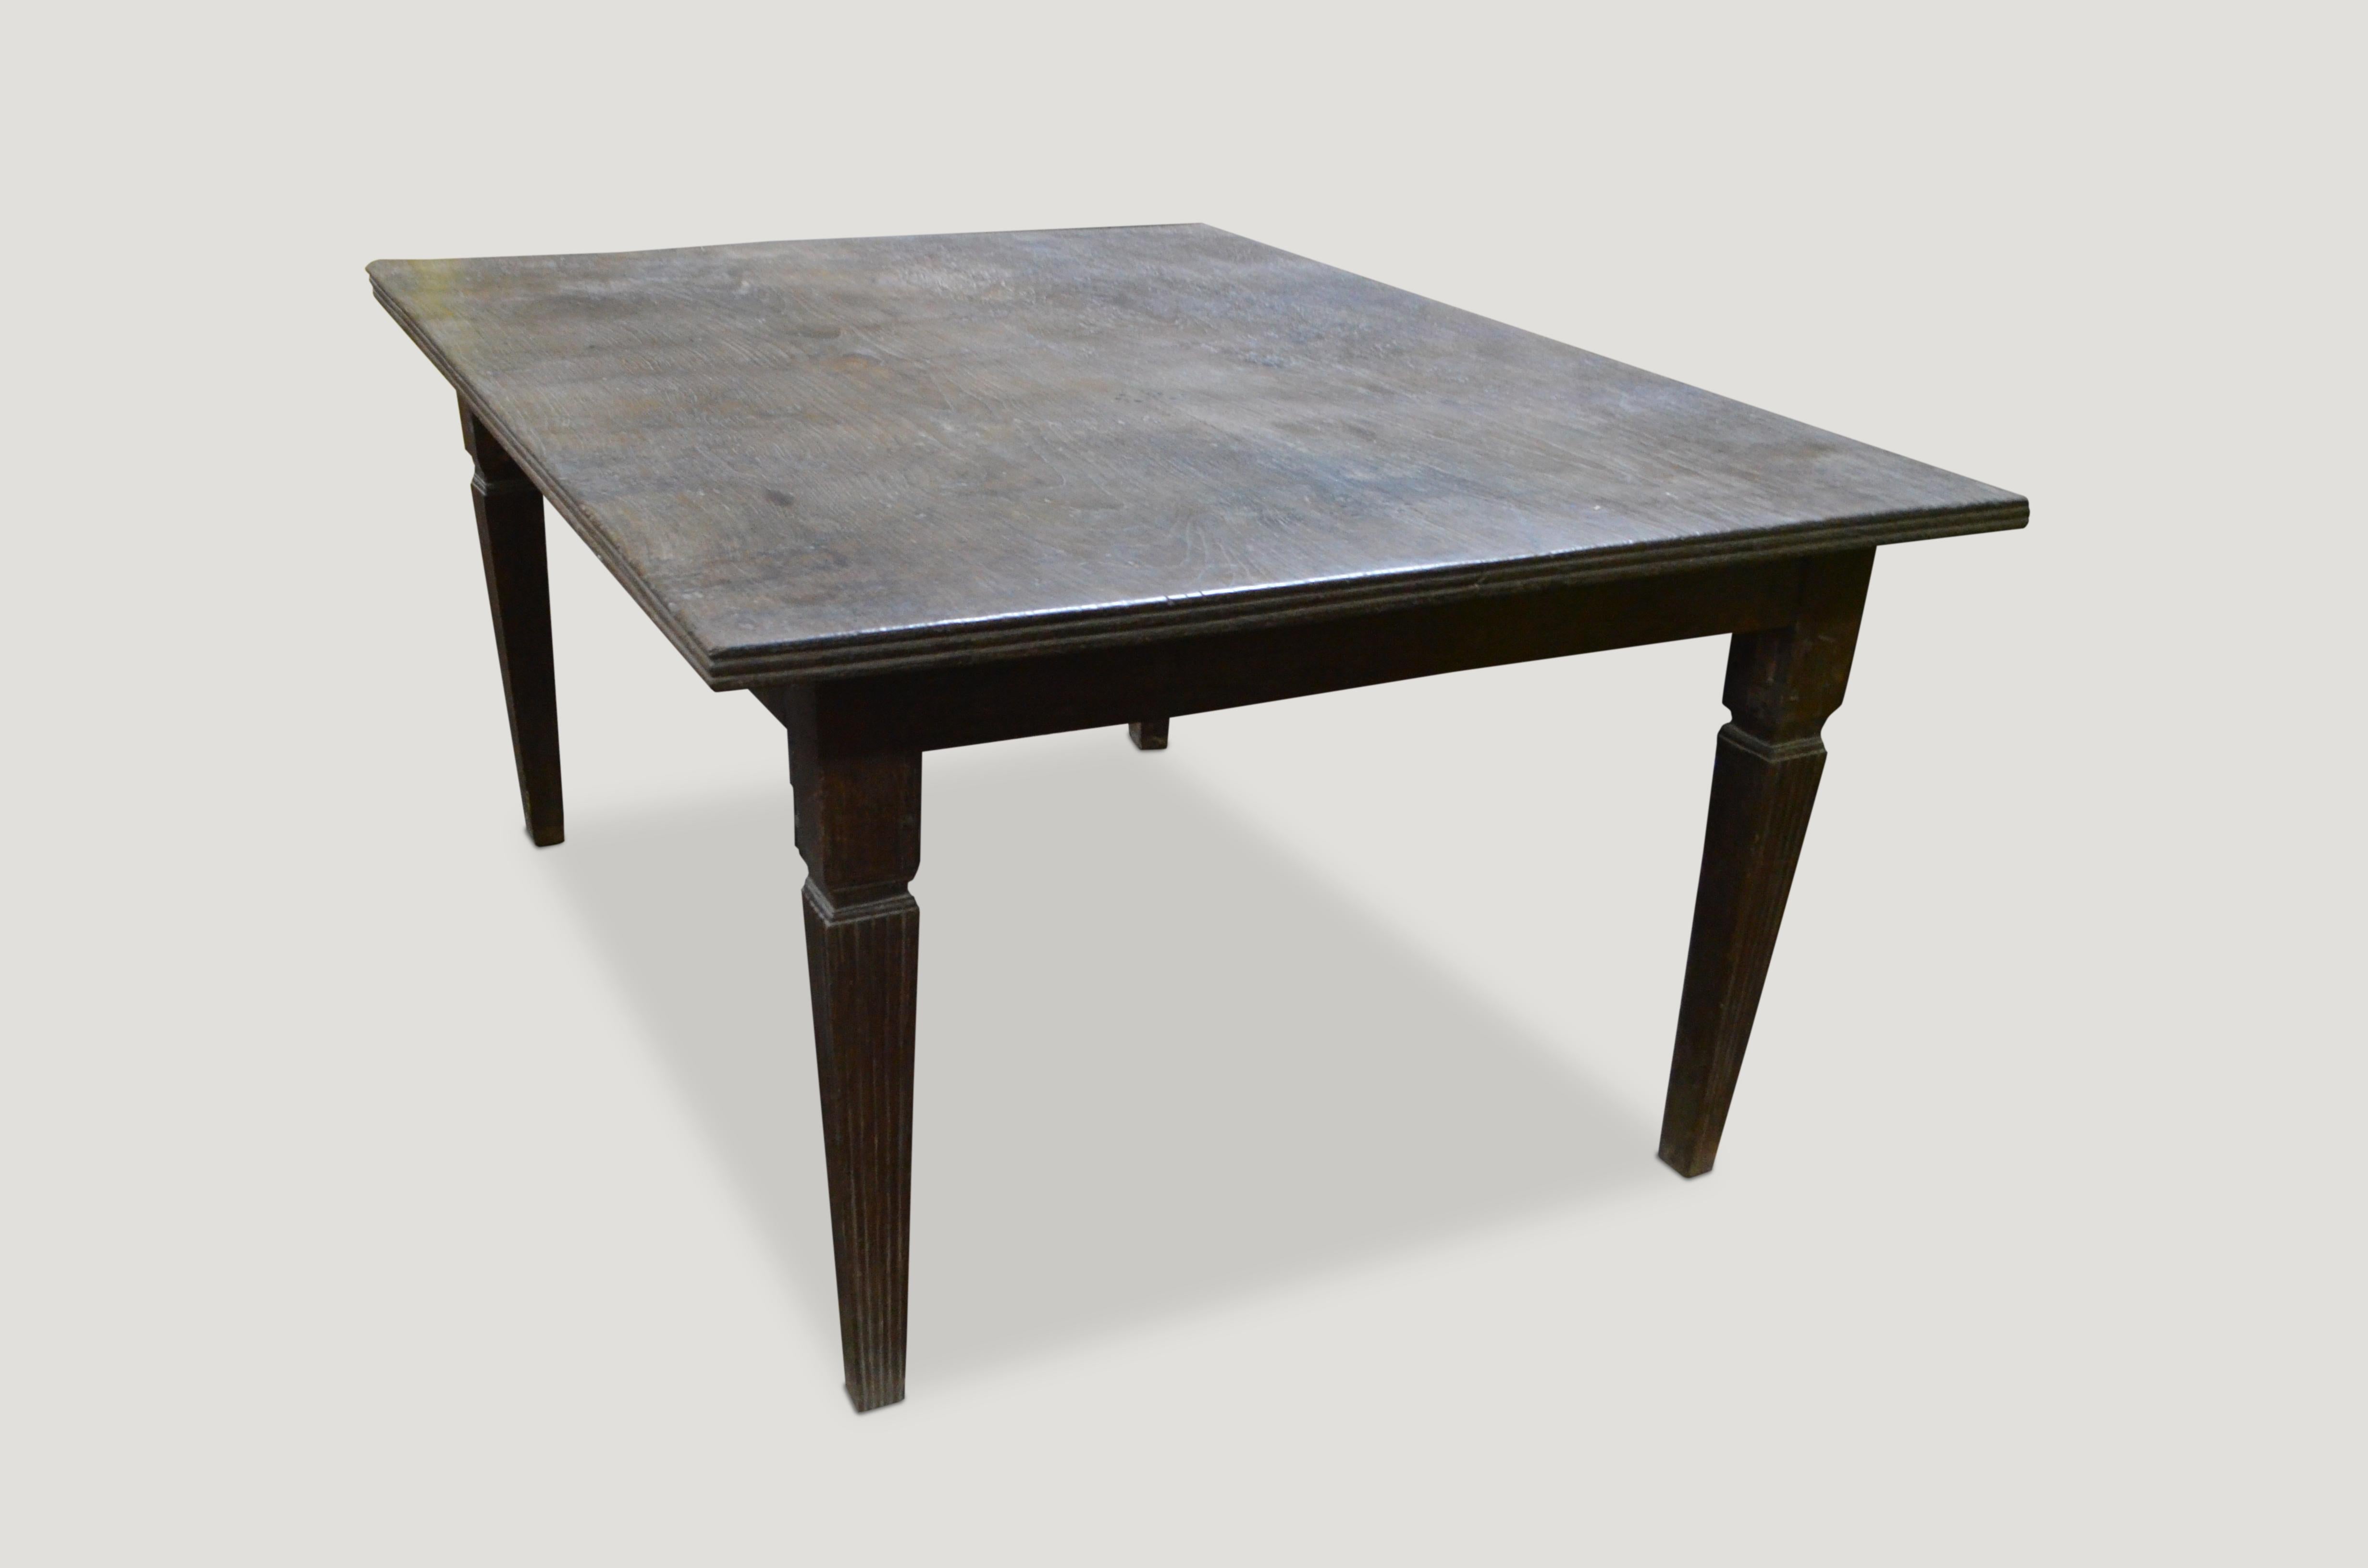 Stunning, rare, antique teak wood dining table with a hand carved bevelled edge and hand carved legs with beautiful patina. 

This table was sourced in the spirit of wabi-sabi a Japanese philosophy that beauty can be found in imperfection and